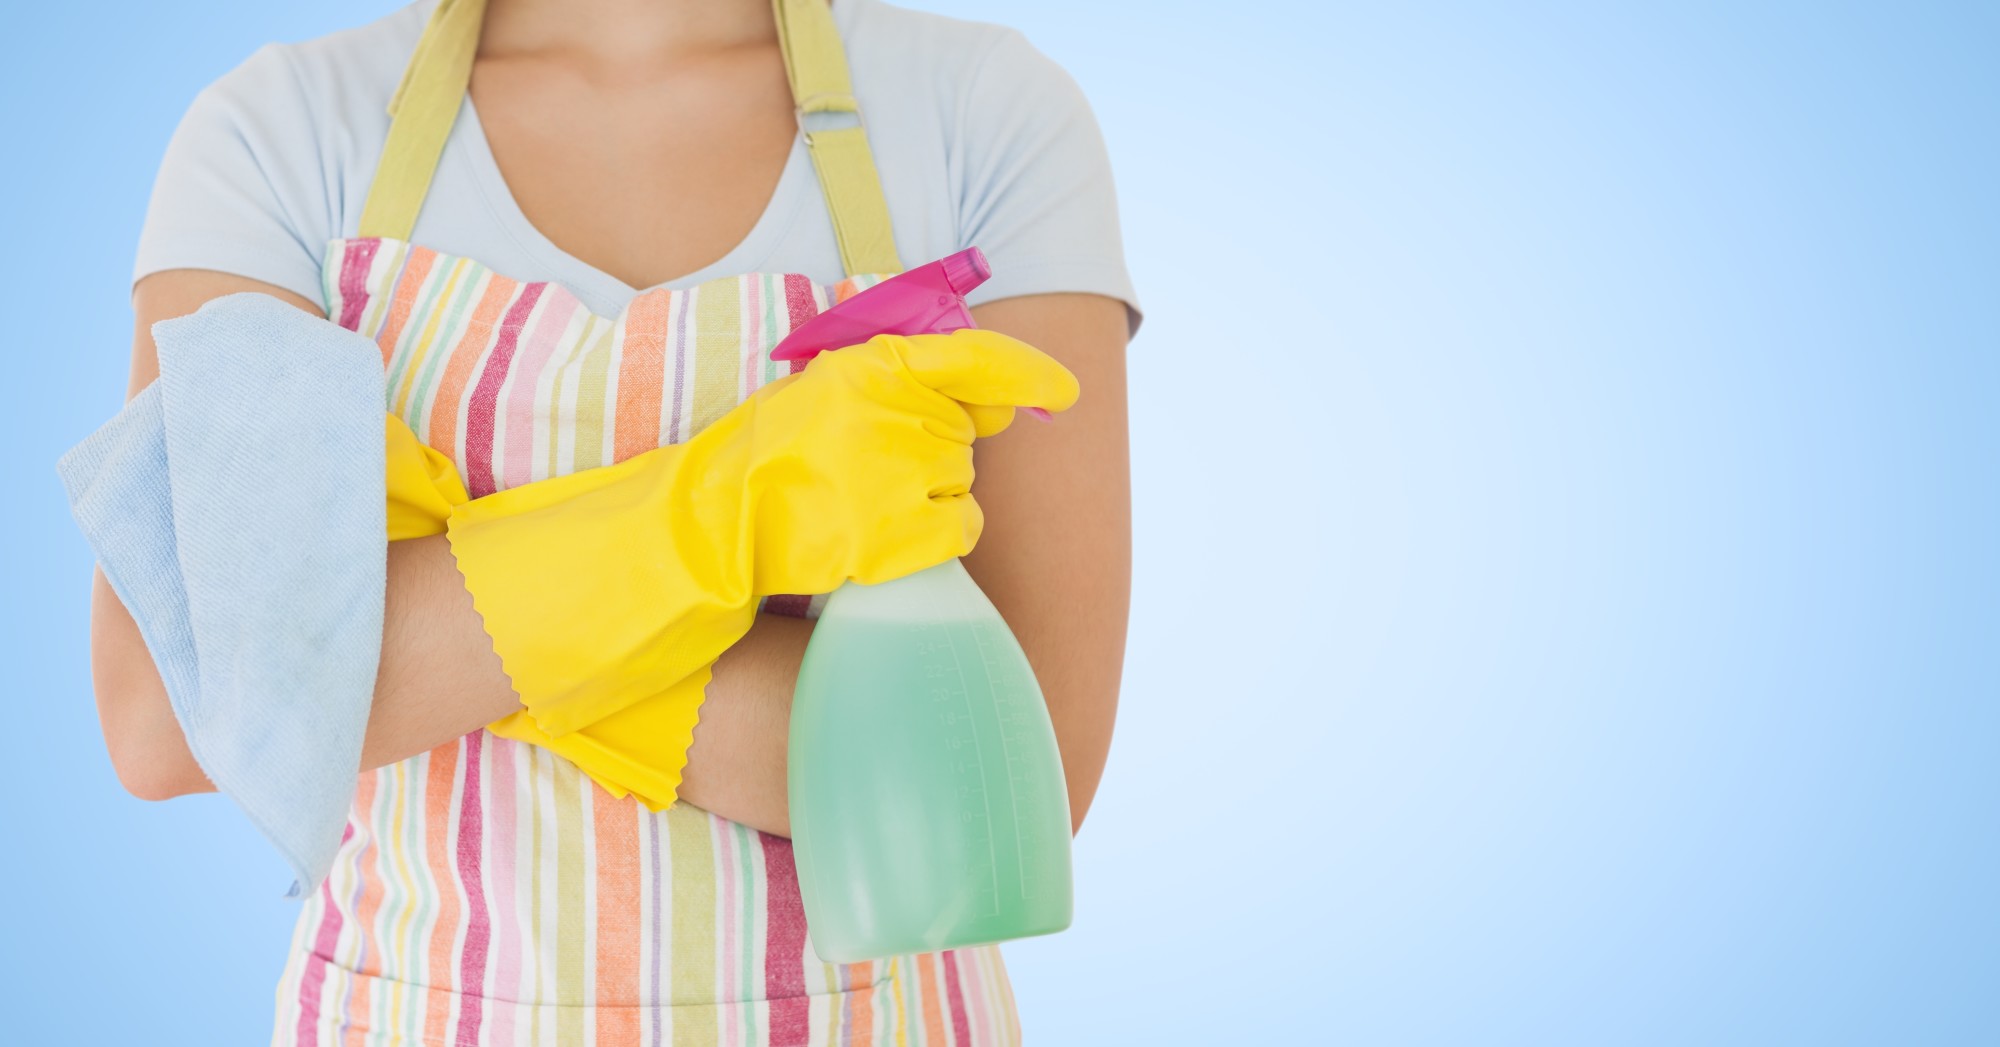 Spring-clean your cleaners: many surface products don't actually